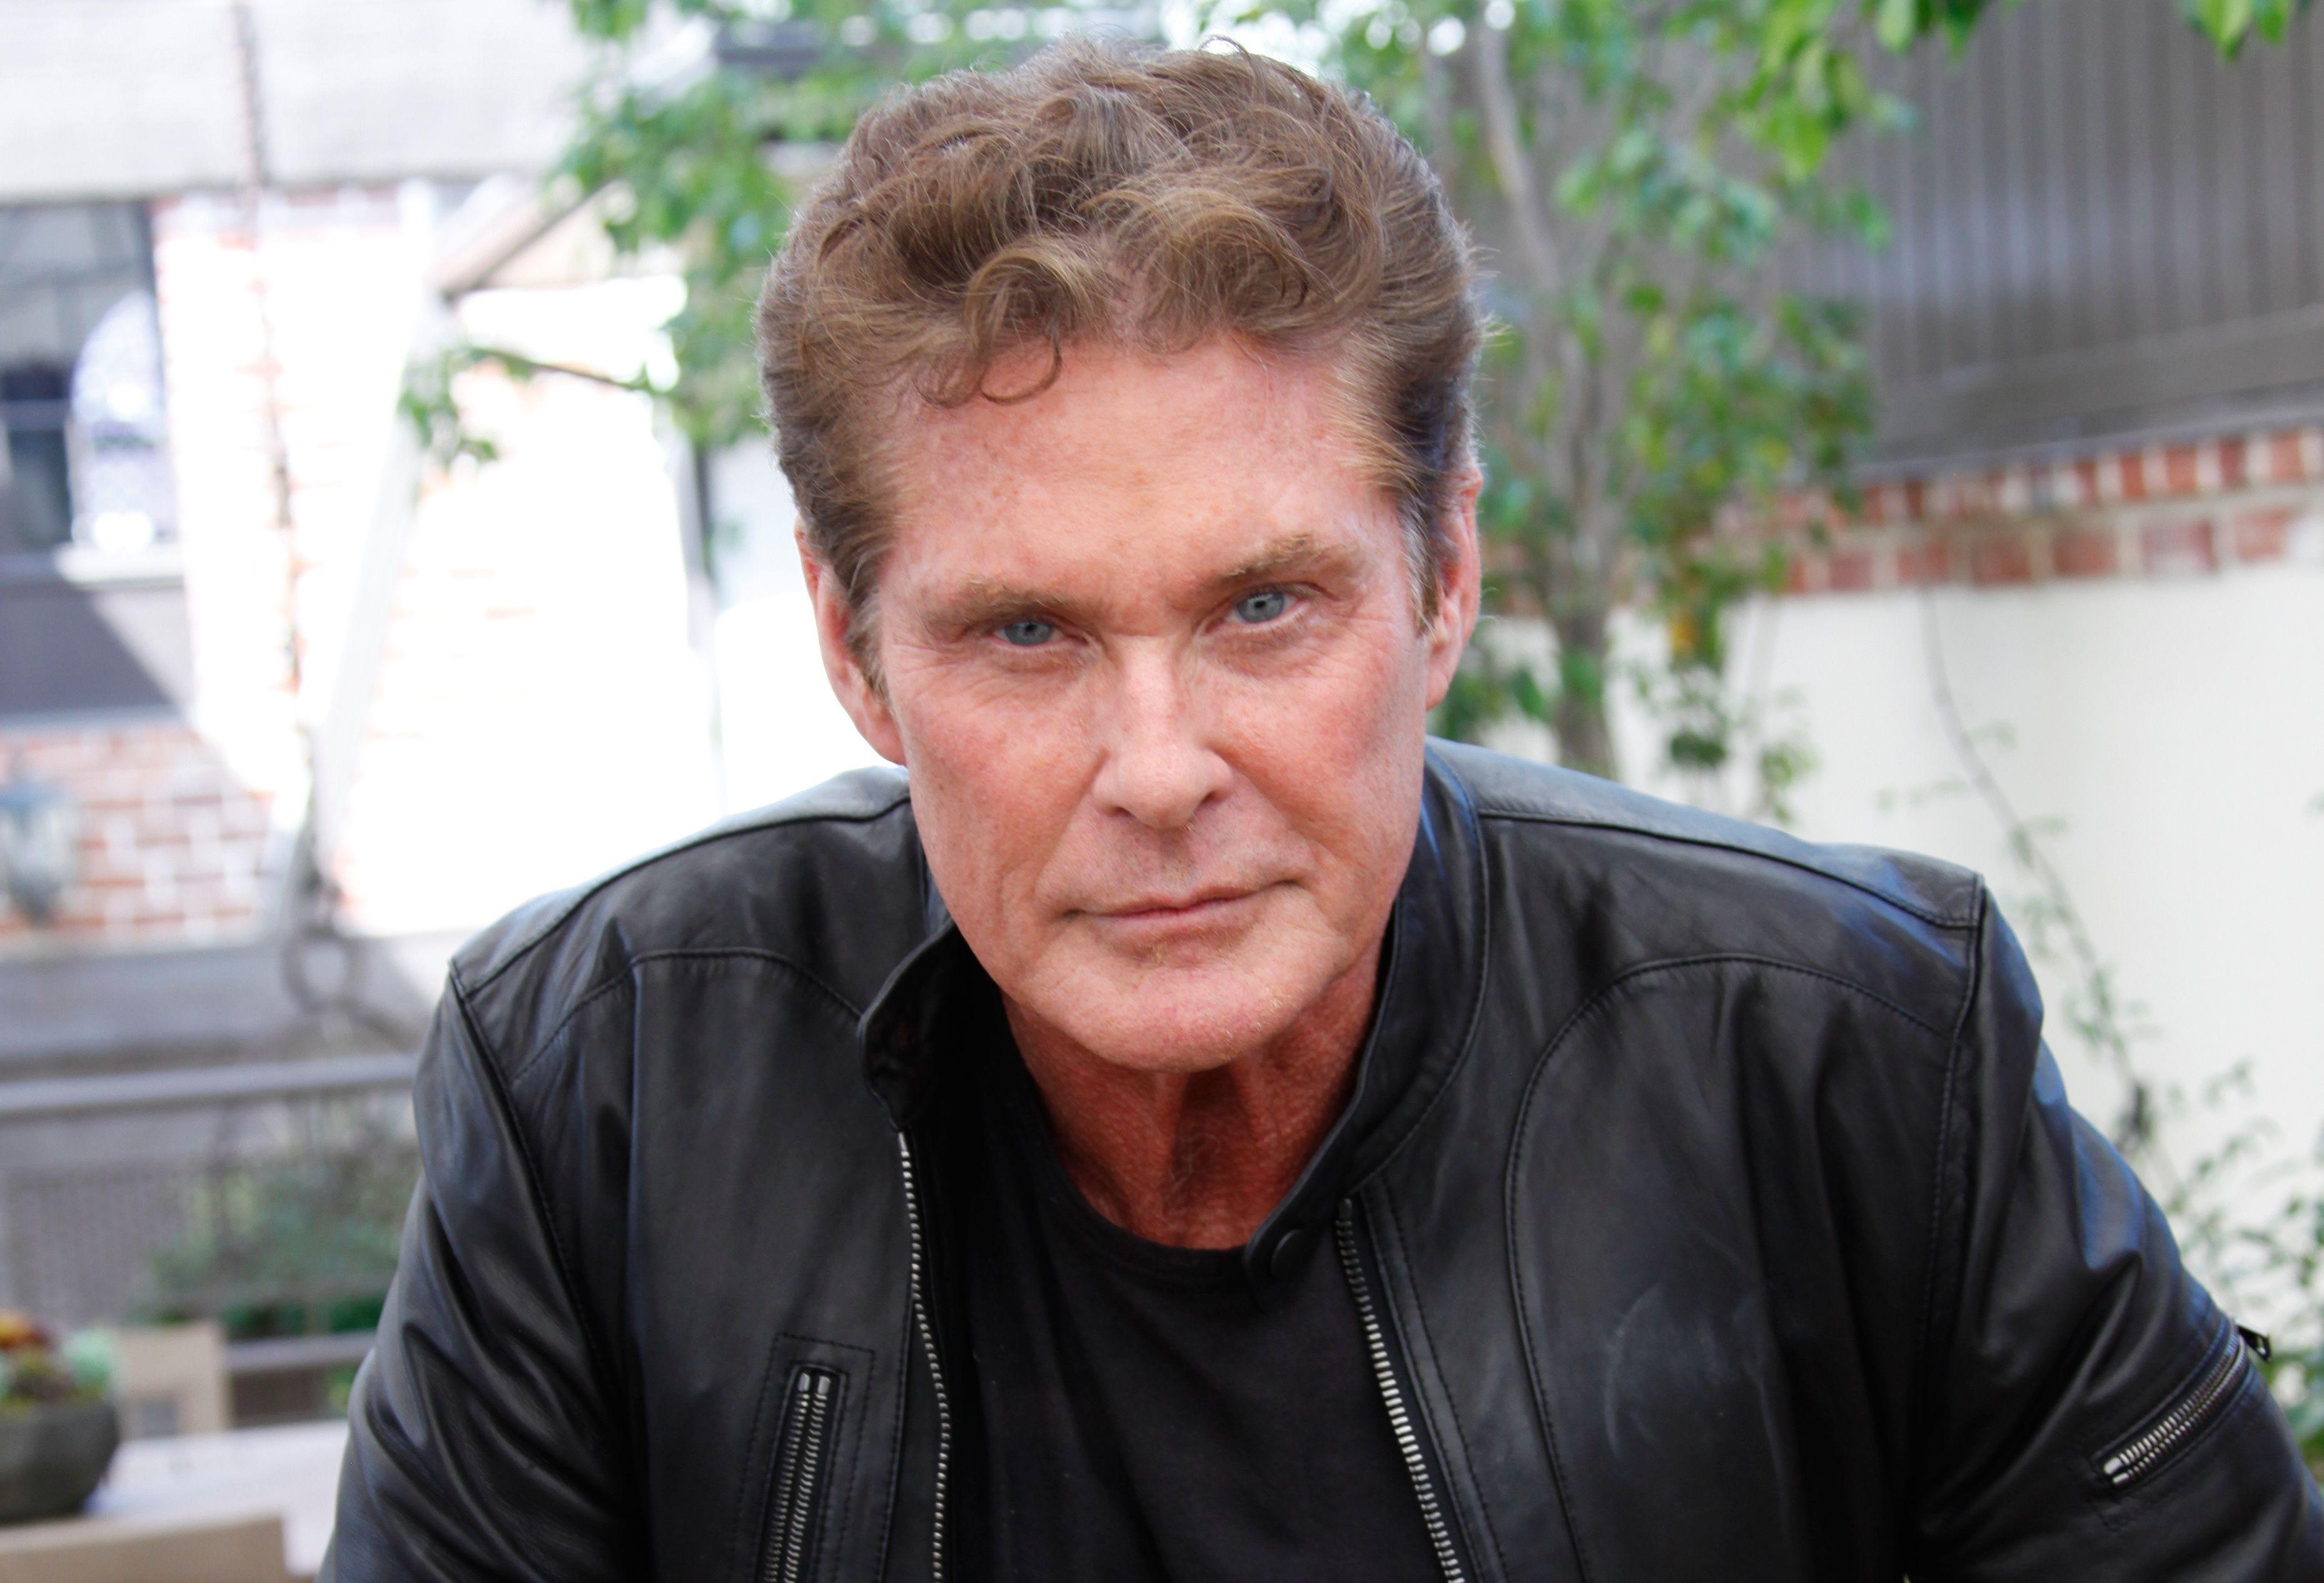 David Hasselhoff Wallpaper Image Photo Picture Background